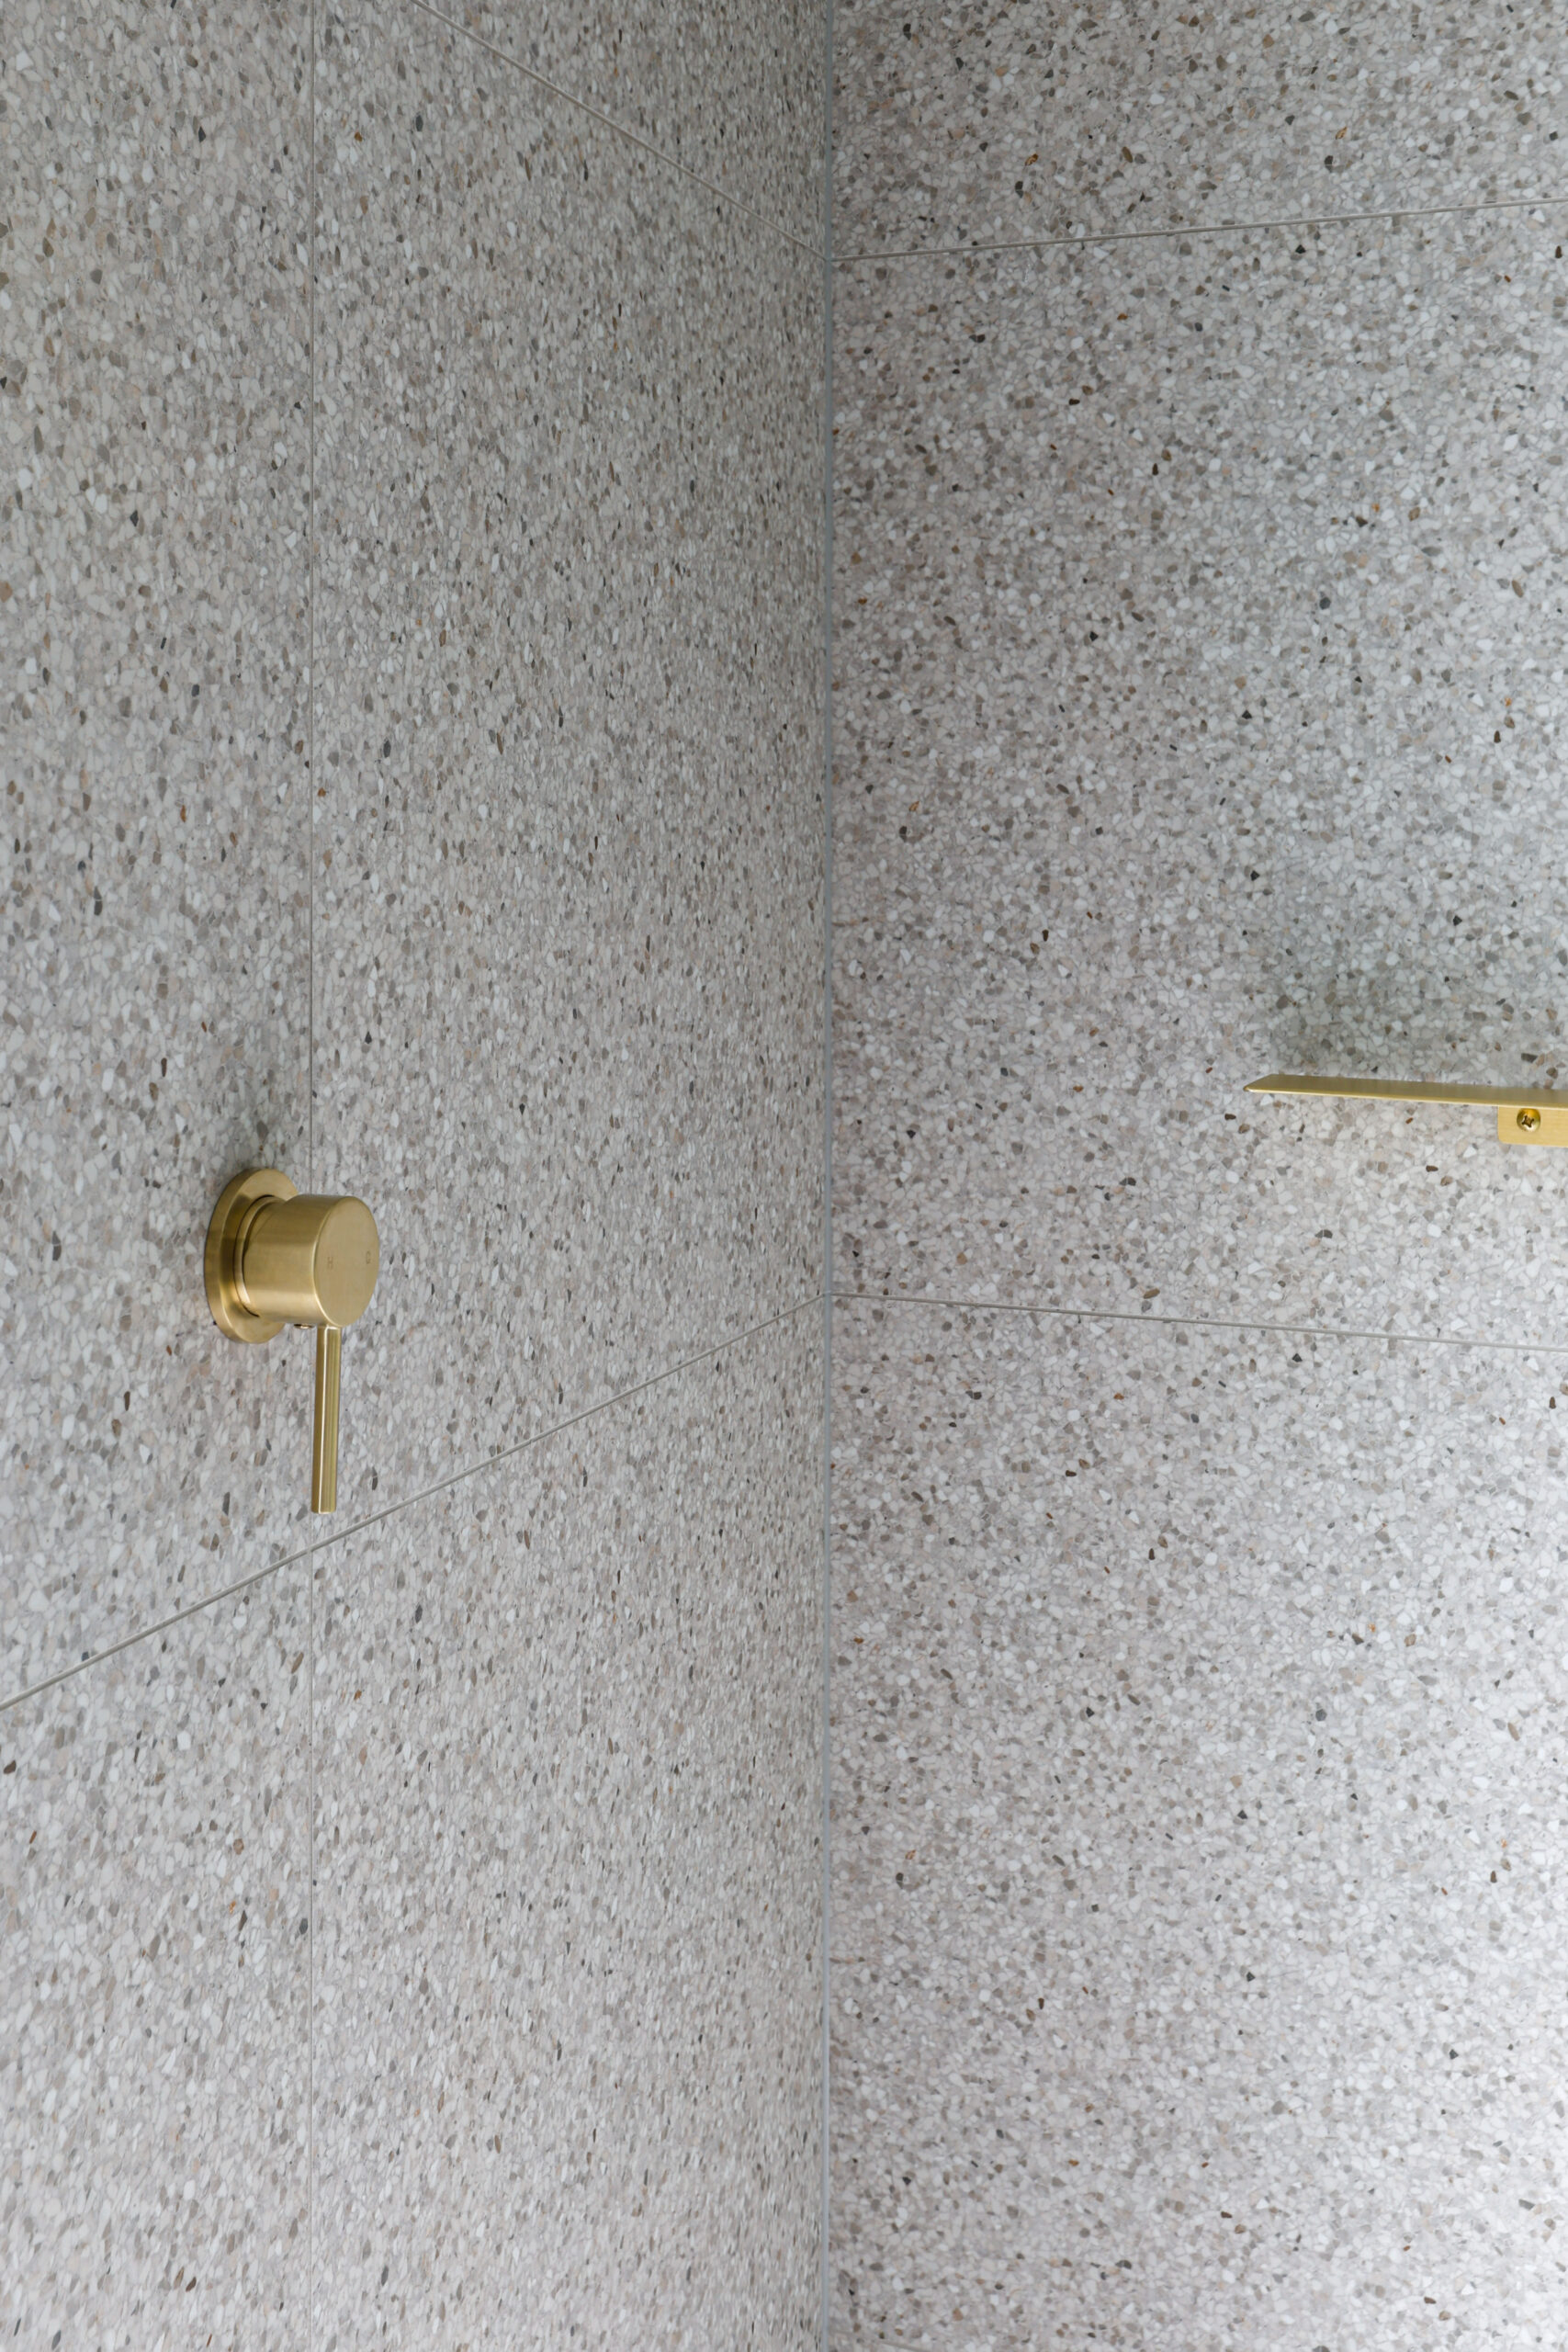 Brushed brass shower shelf and wall mixer on terrazzo tiles